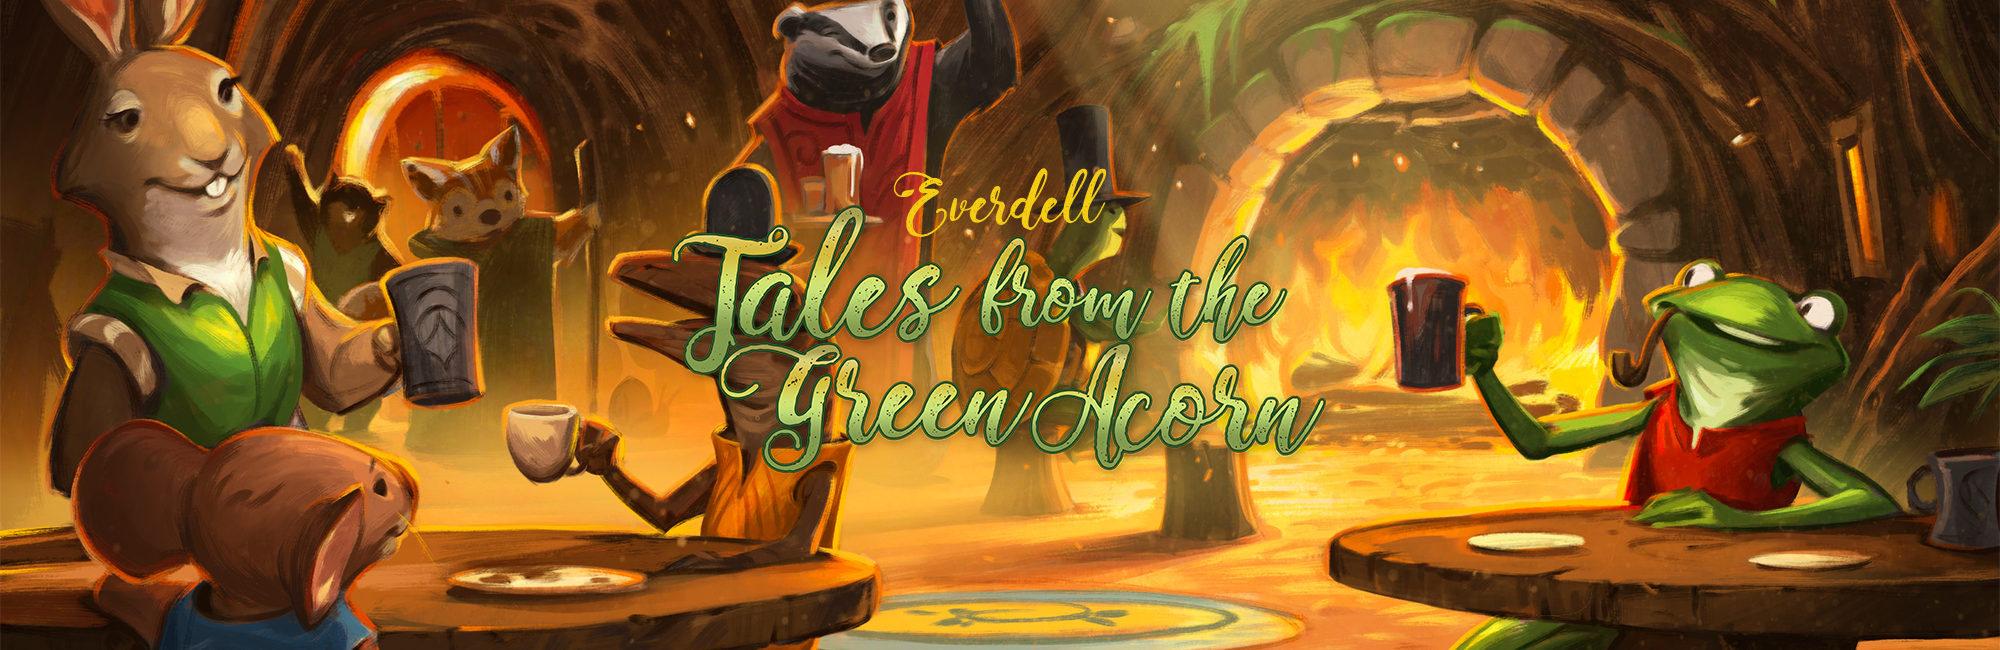 Everdell Tales from the Green Acorn expanded lore and new artwork